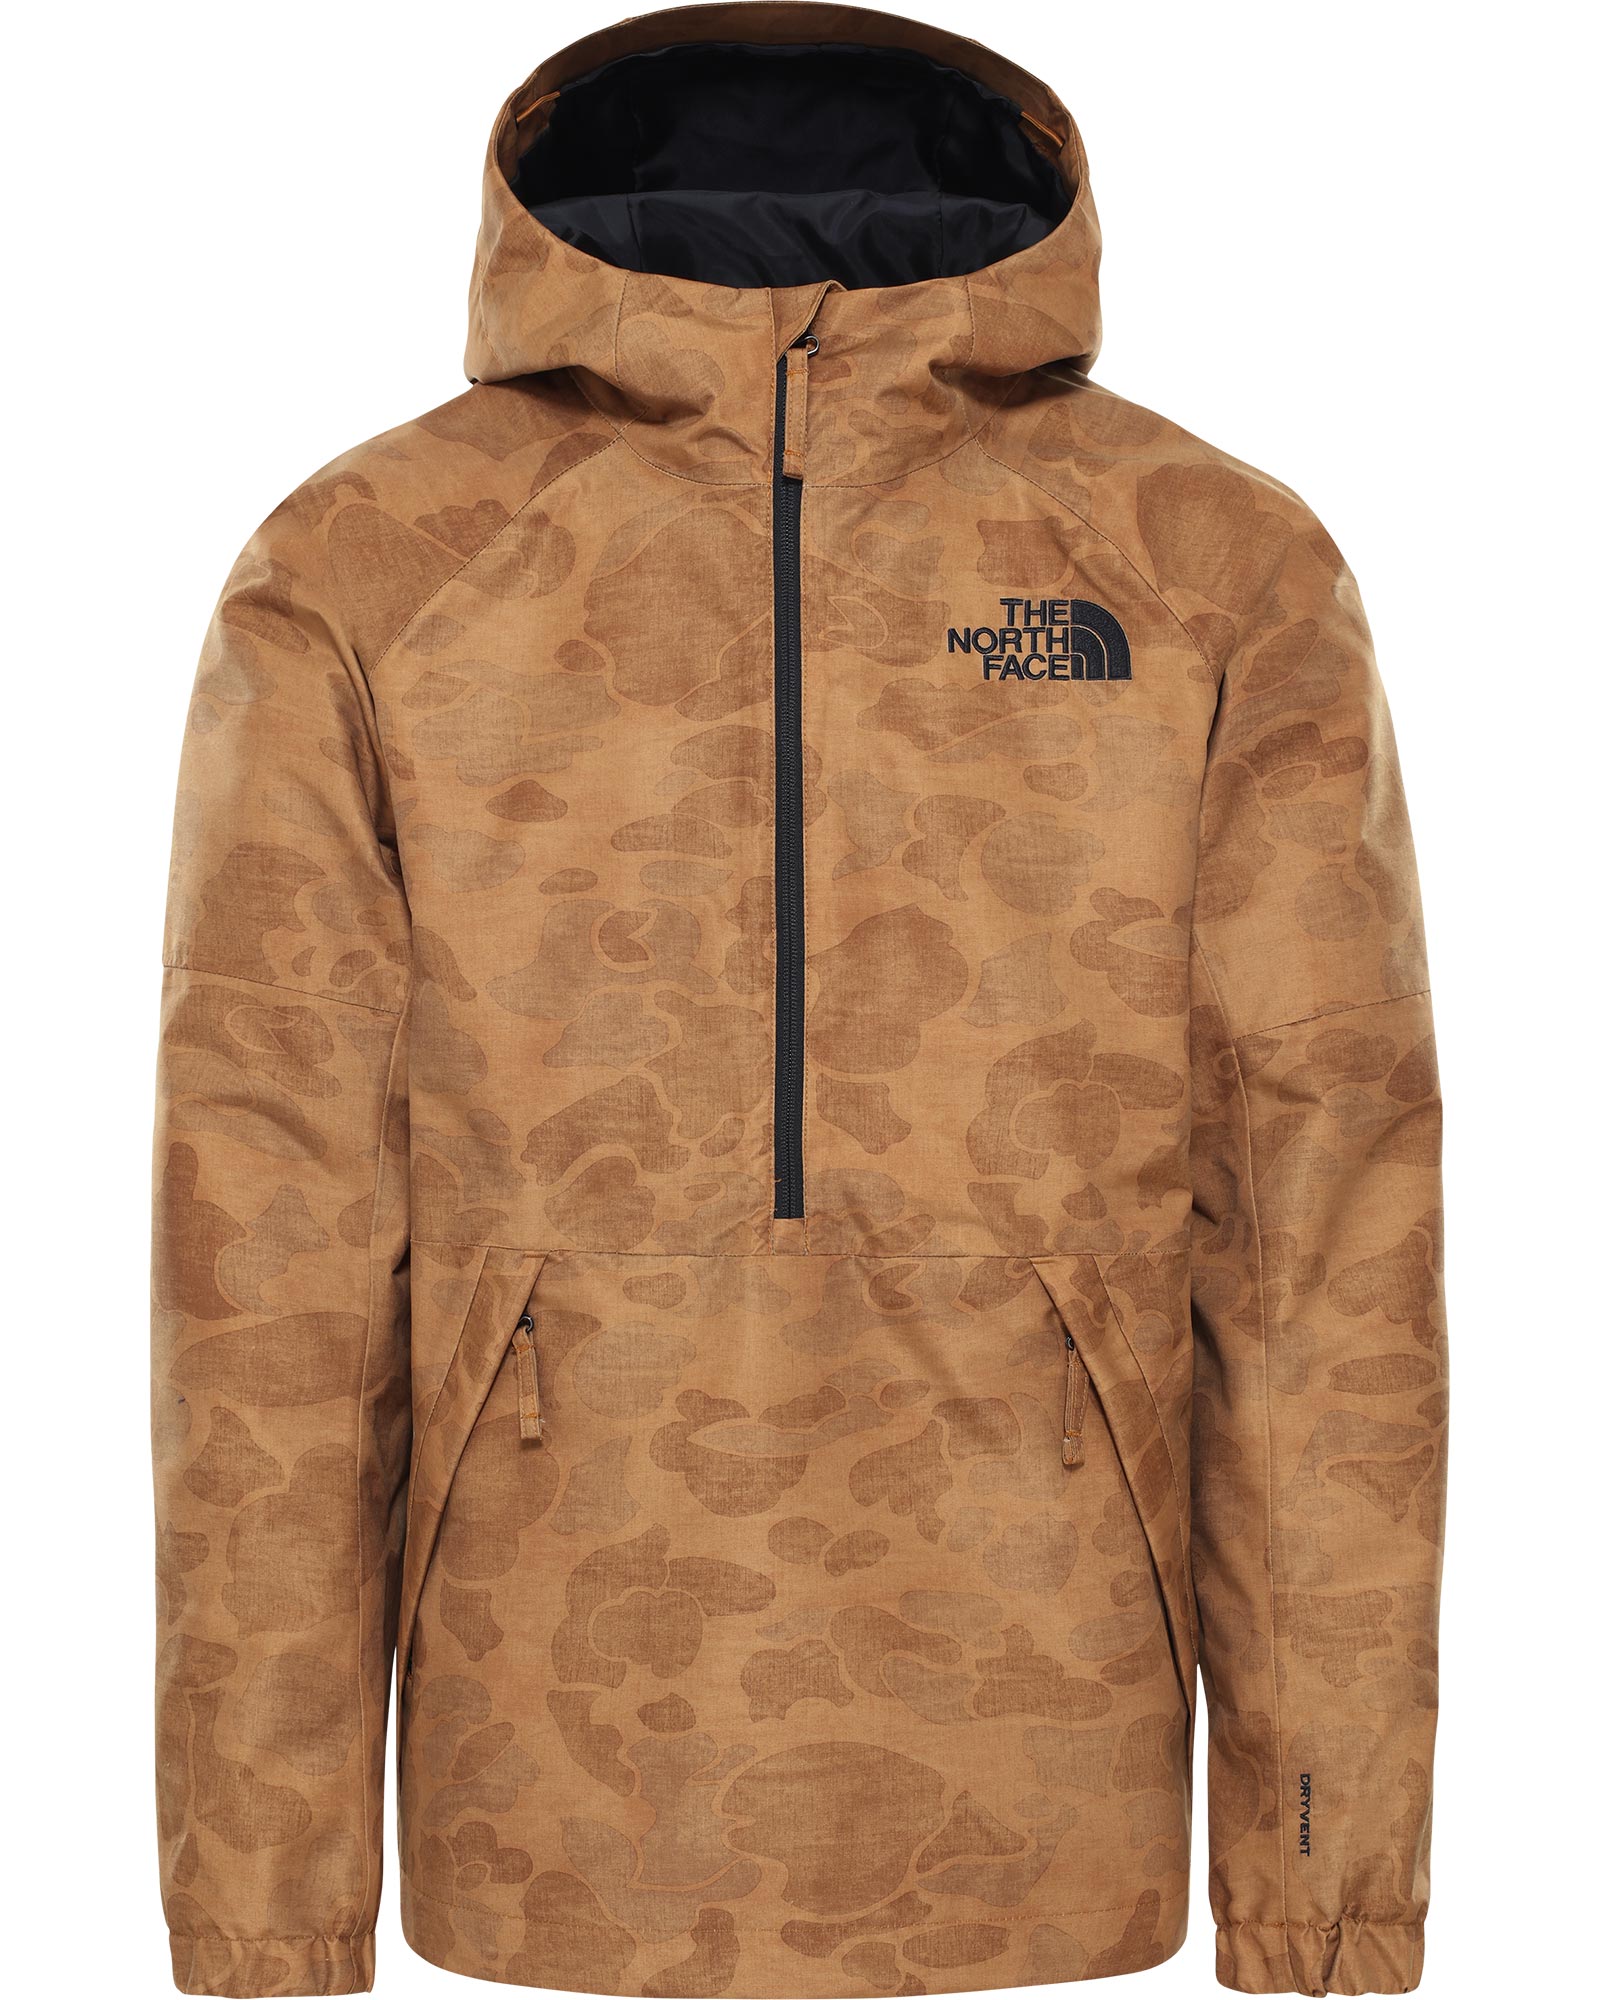 The North Face Up and Over Men's Anorak